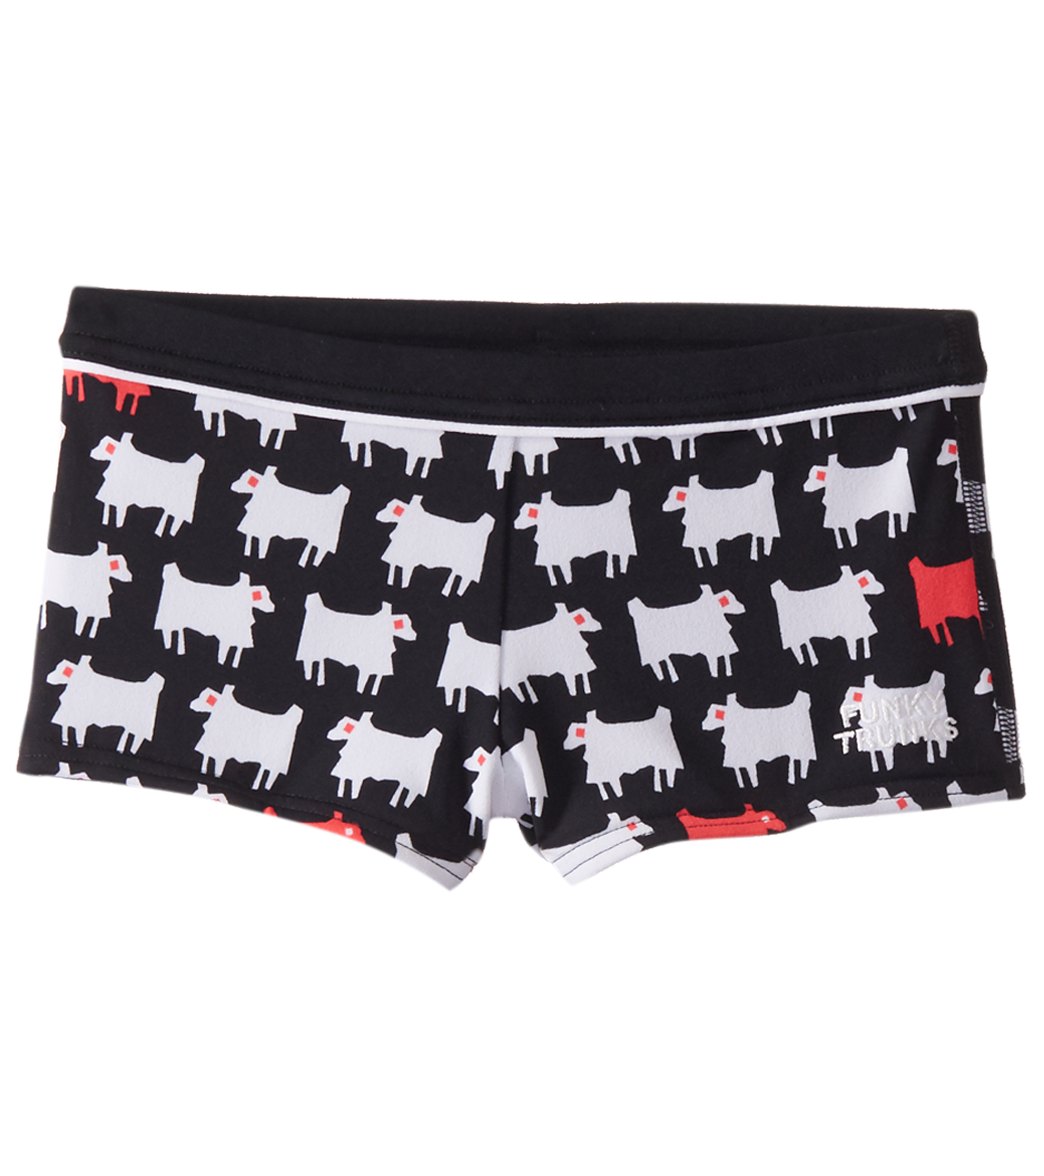 Funky Trunks Toddler Boys' Angry Ram Square Leg Trunk Brief Swimsuit - Black/Red/White 1T Polyester - Swimoutlet.com